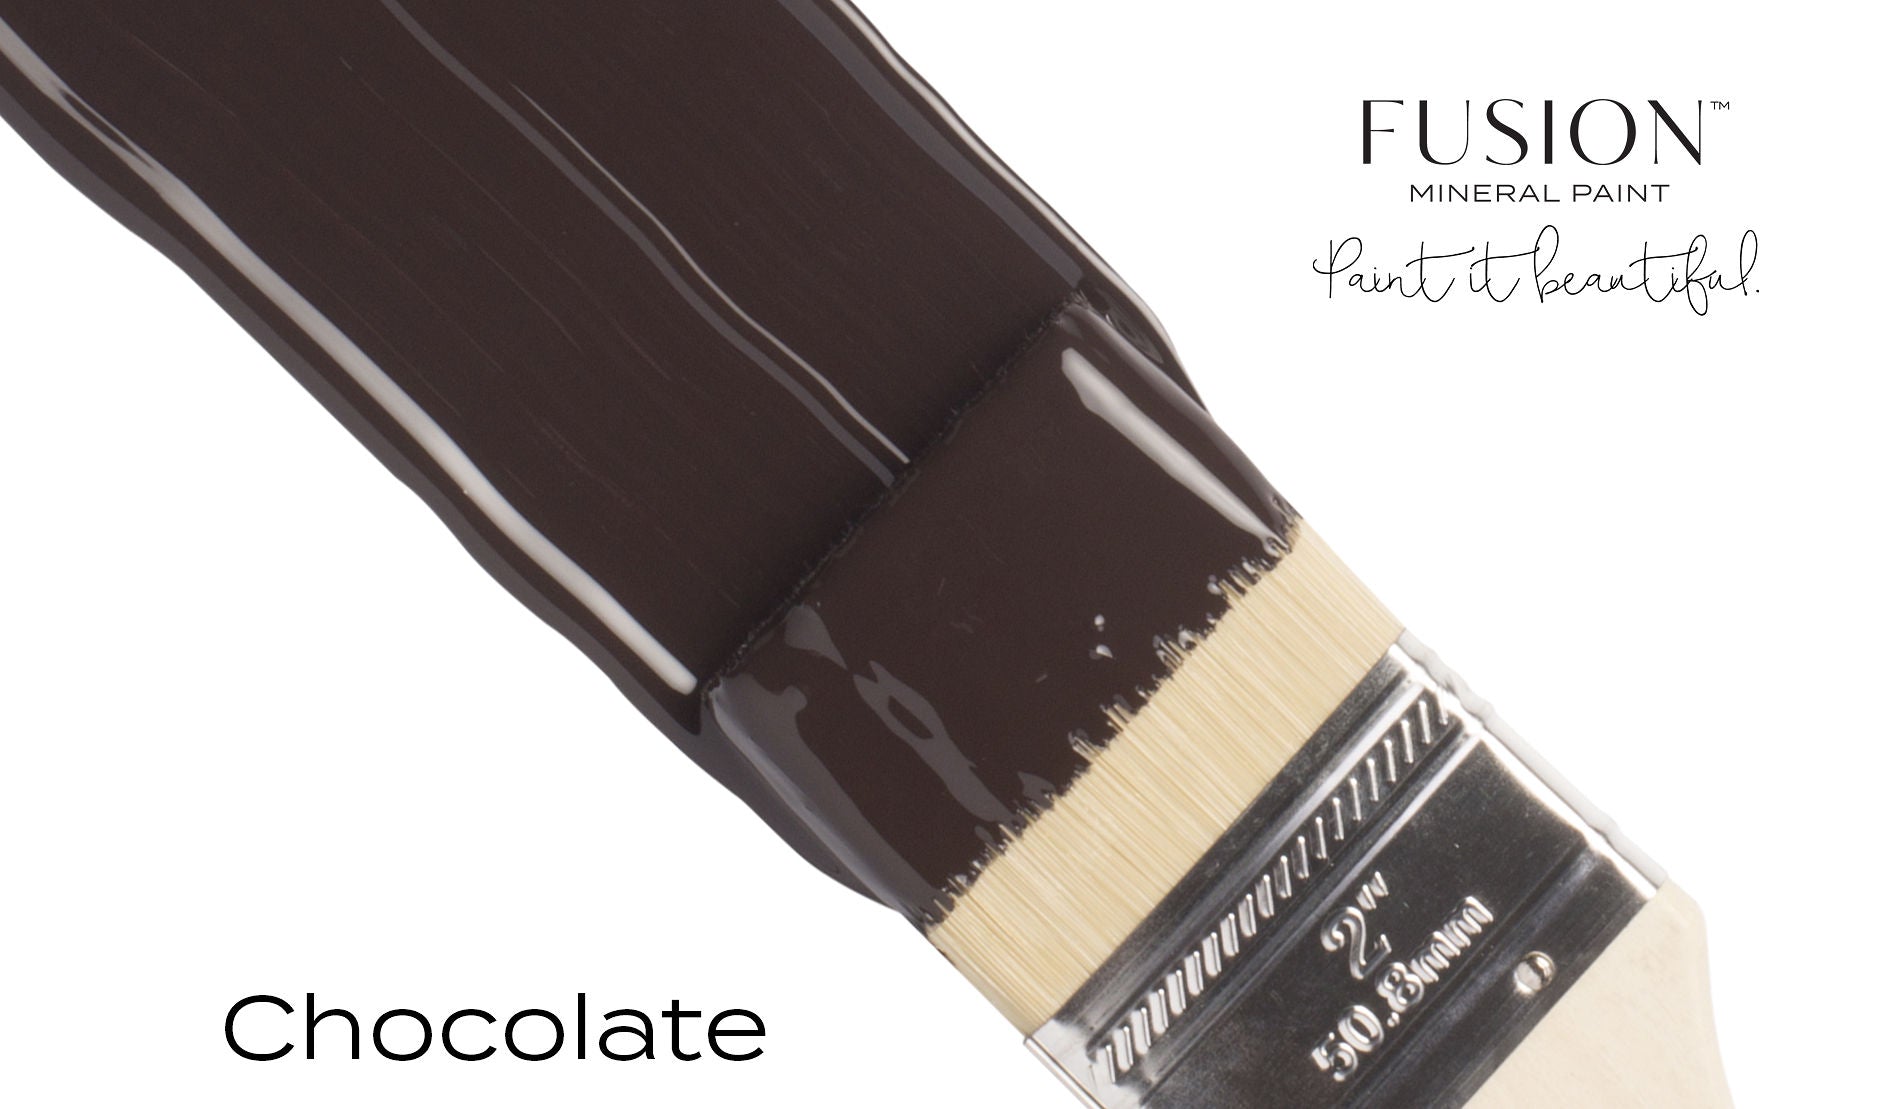 Fusion Mineral Paint Chocolate brush